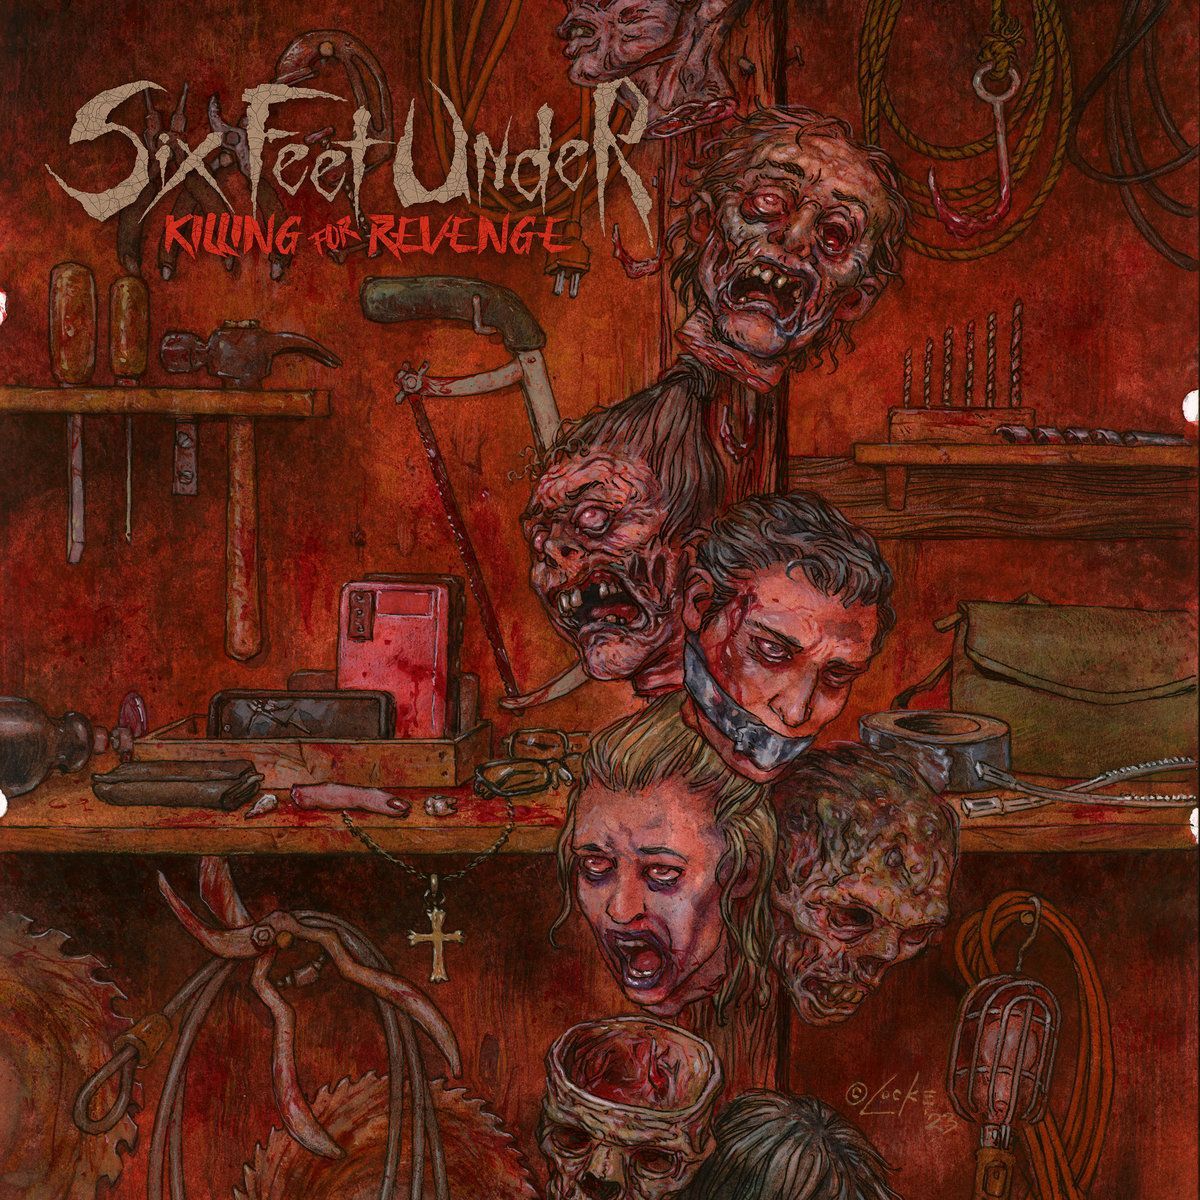 Death Metal legends SIX FEET UNDER released their 18th studio album 'Killing for Revenge' today via Metal Blade Records. Did this album meet, exceed, or fall short of your expectations? #sixfeetunder #killingforrevenge #deathmetal #brutaldeathmetal @metalblade @sixfeetofficial